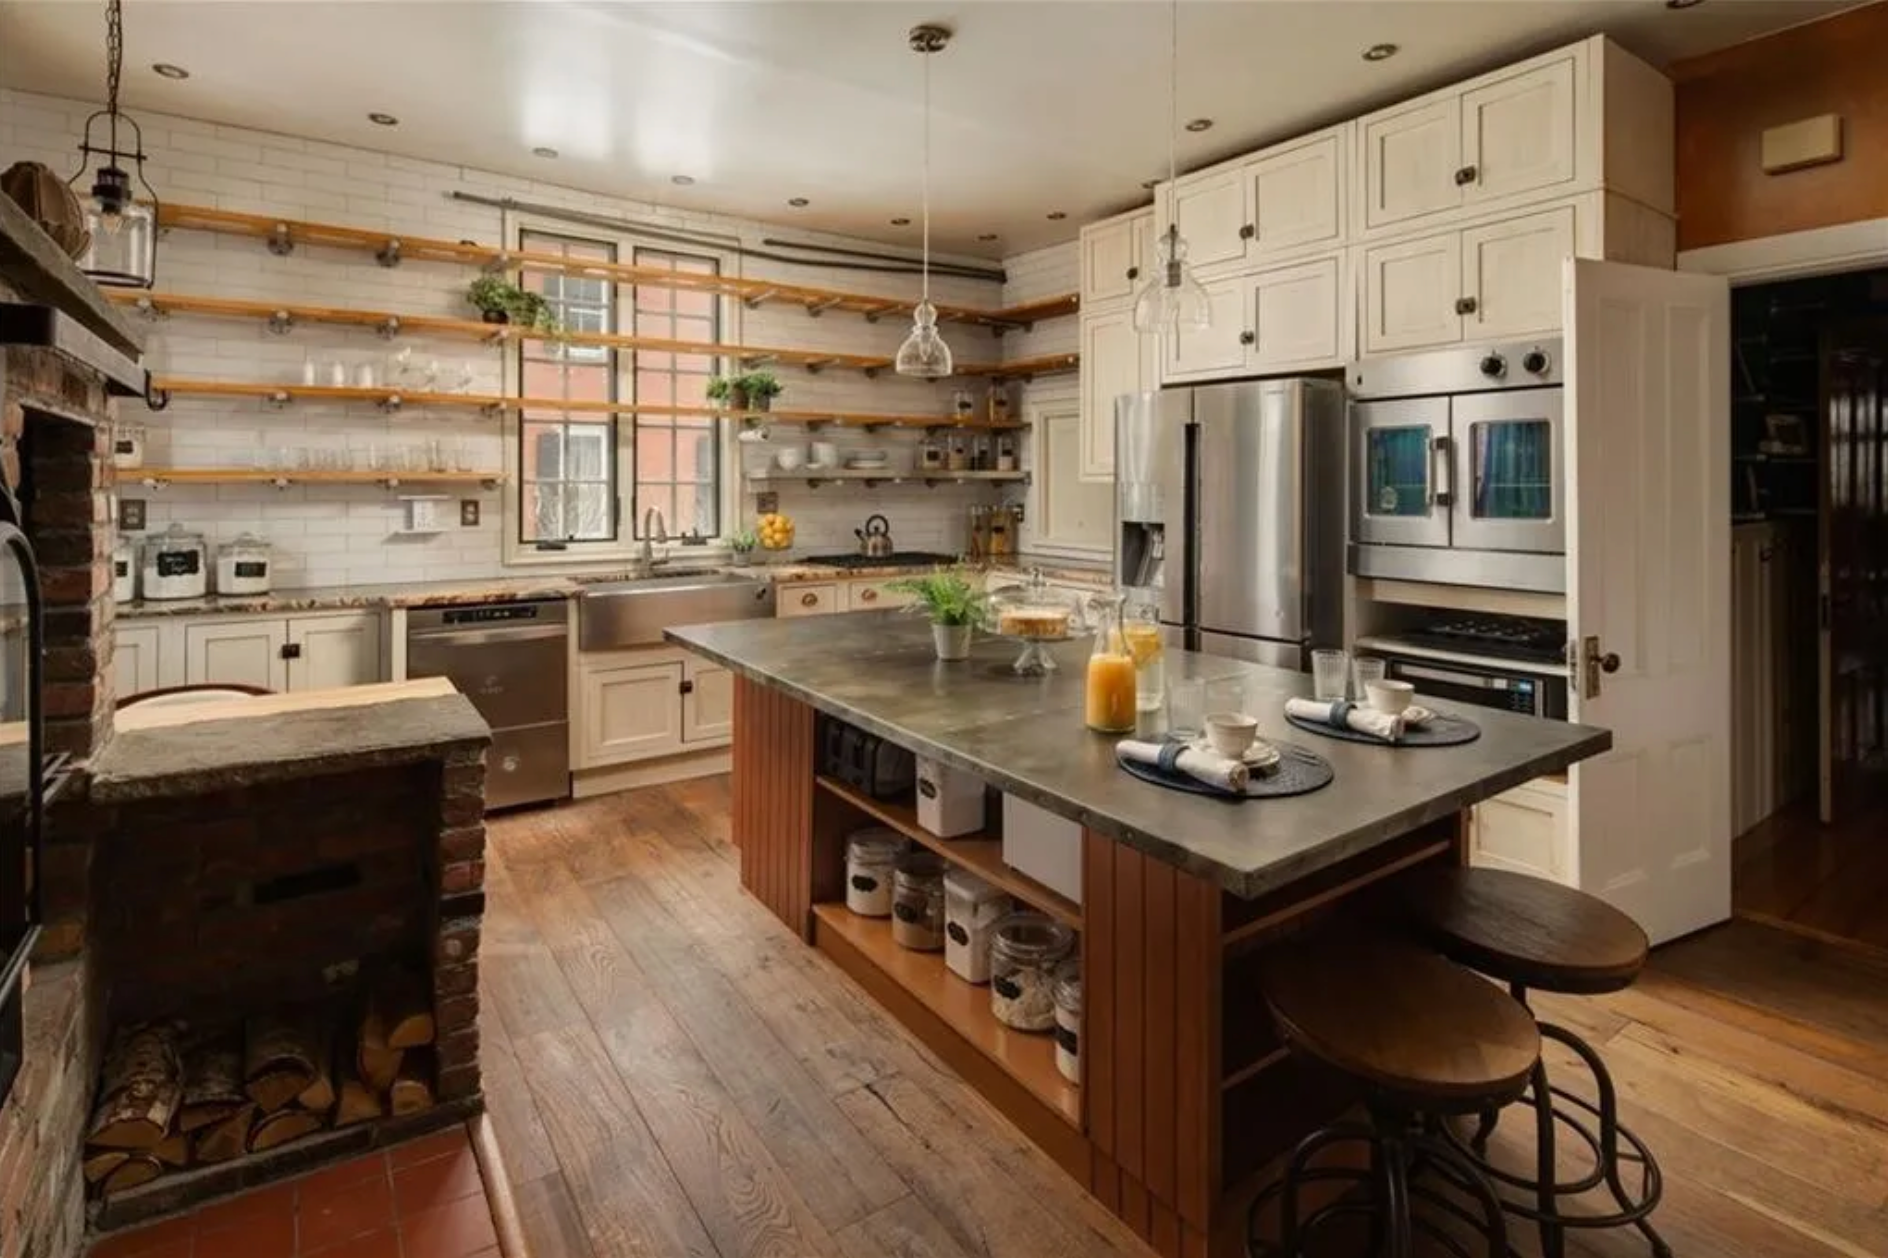 The kitchen has hardwood floors and stainless steel appliances, as well as cream Shaker-style cabinets and exposed wood floating shelves.